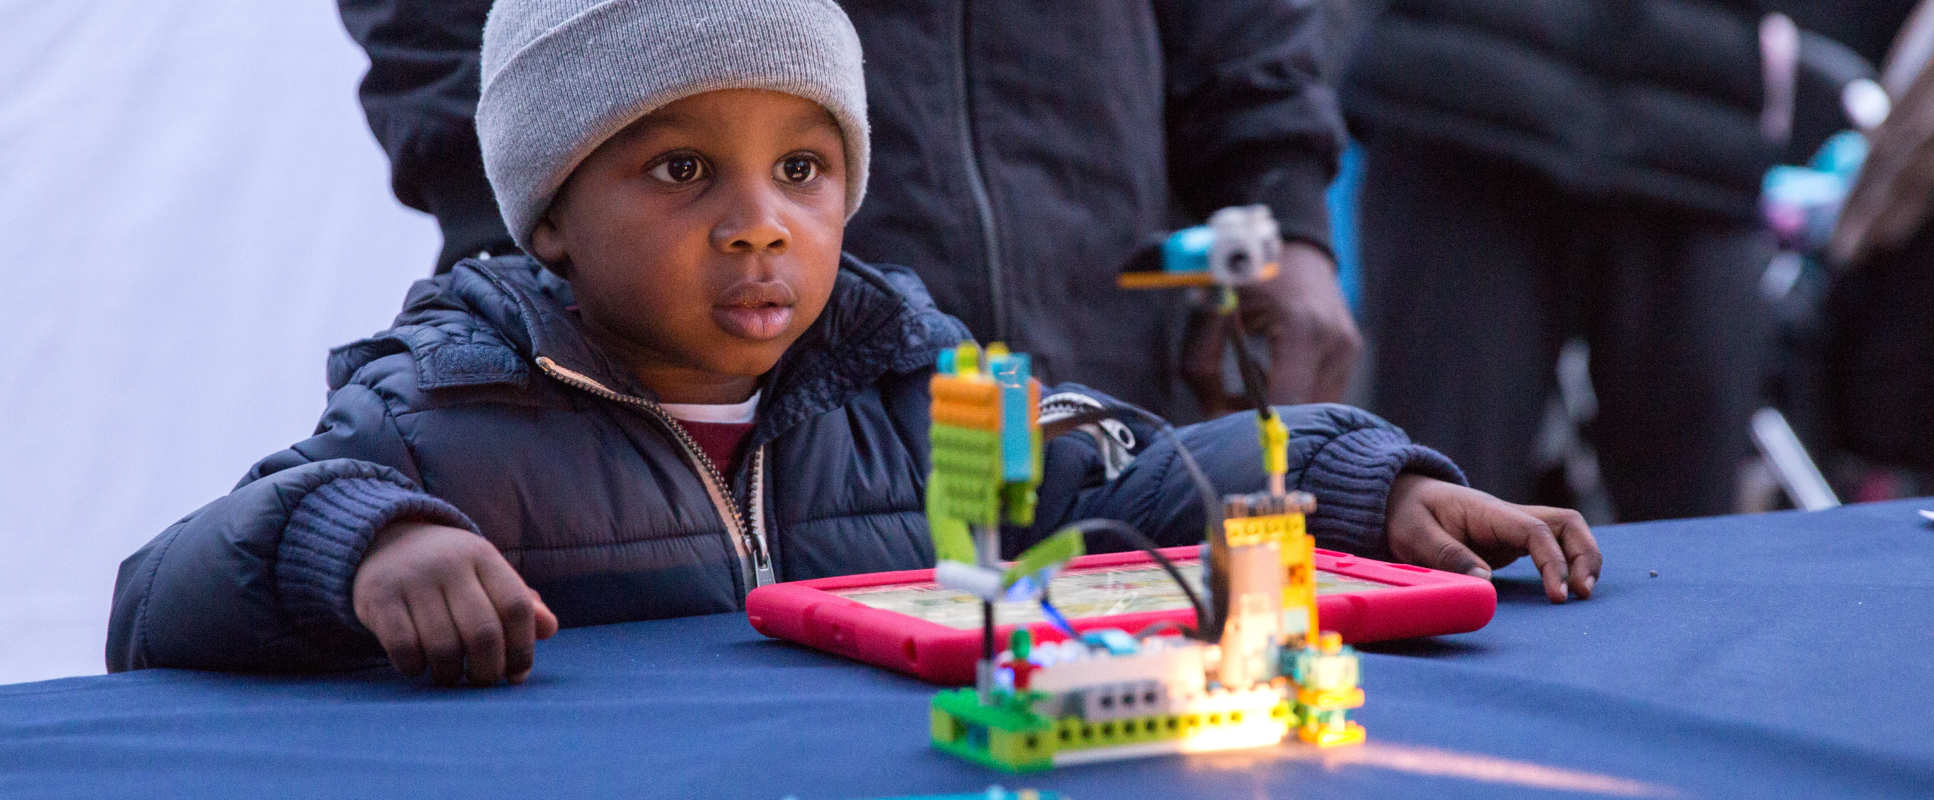 A child at the White City Christmas pop-up